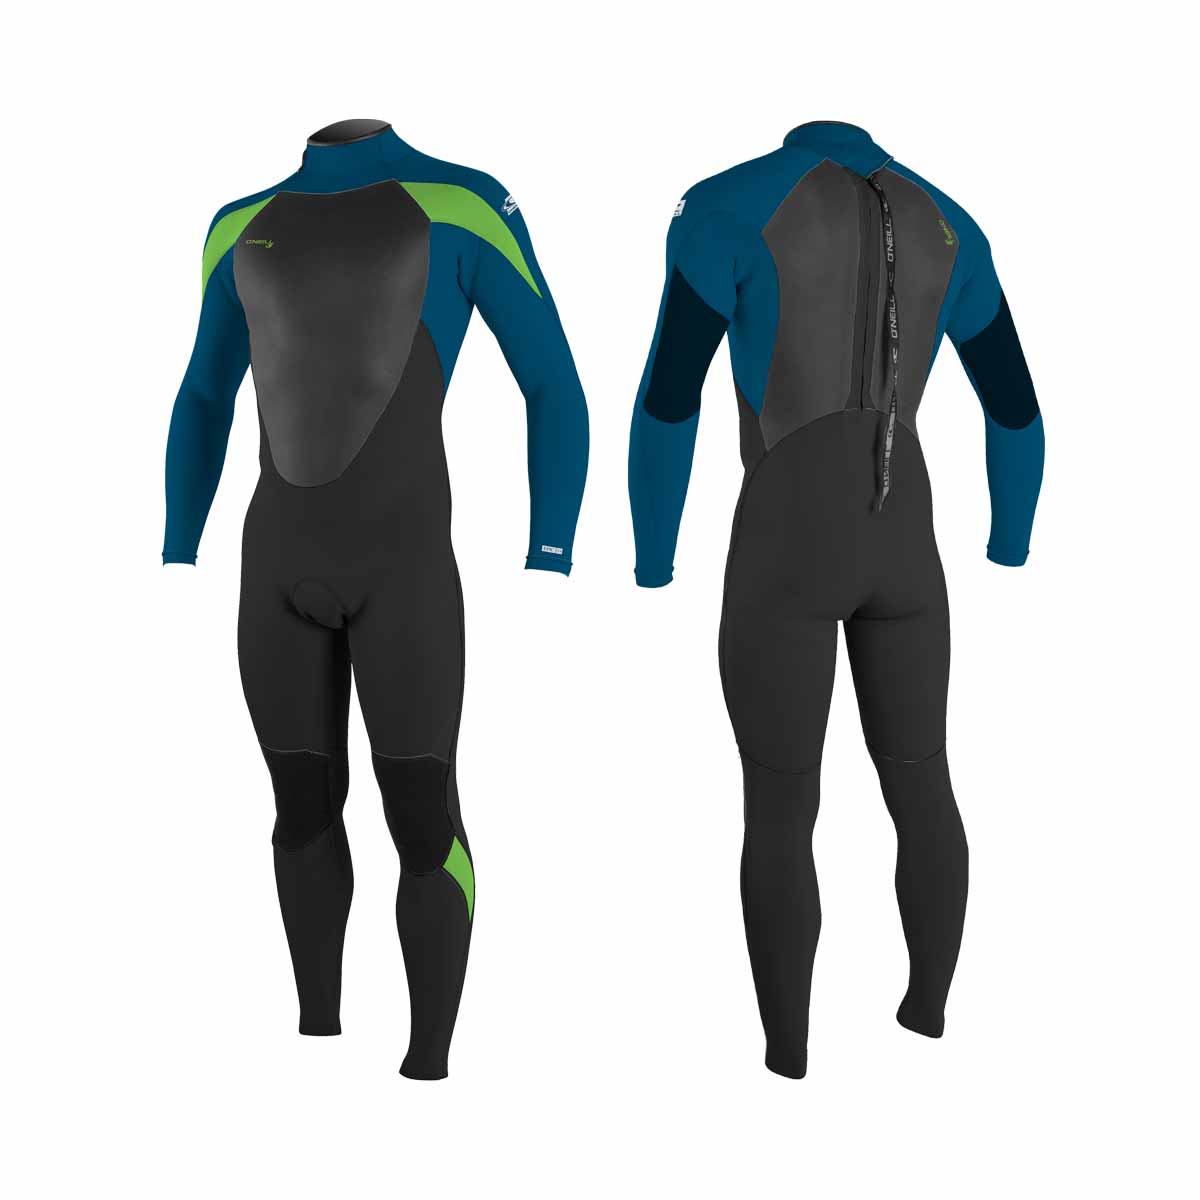 O'Neill Youth Epic full 5/4 mm Wetsuit – Black/Ultrablu/Dayglo GS6